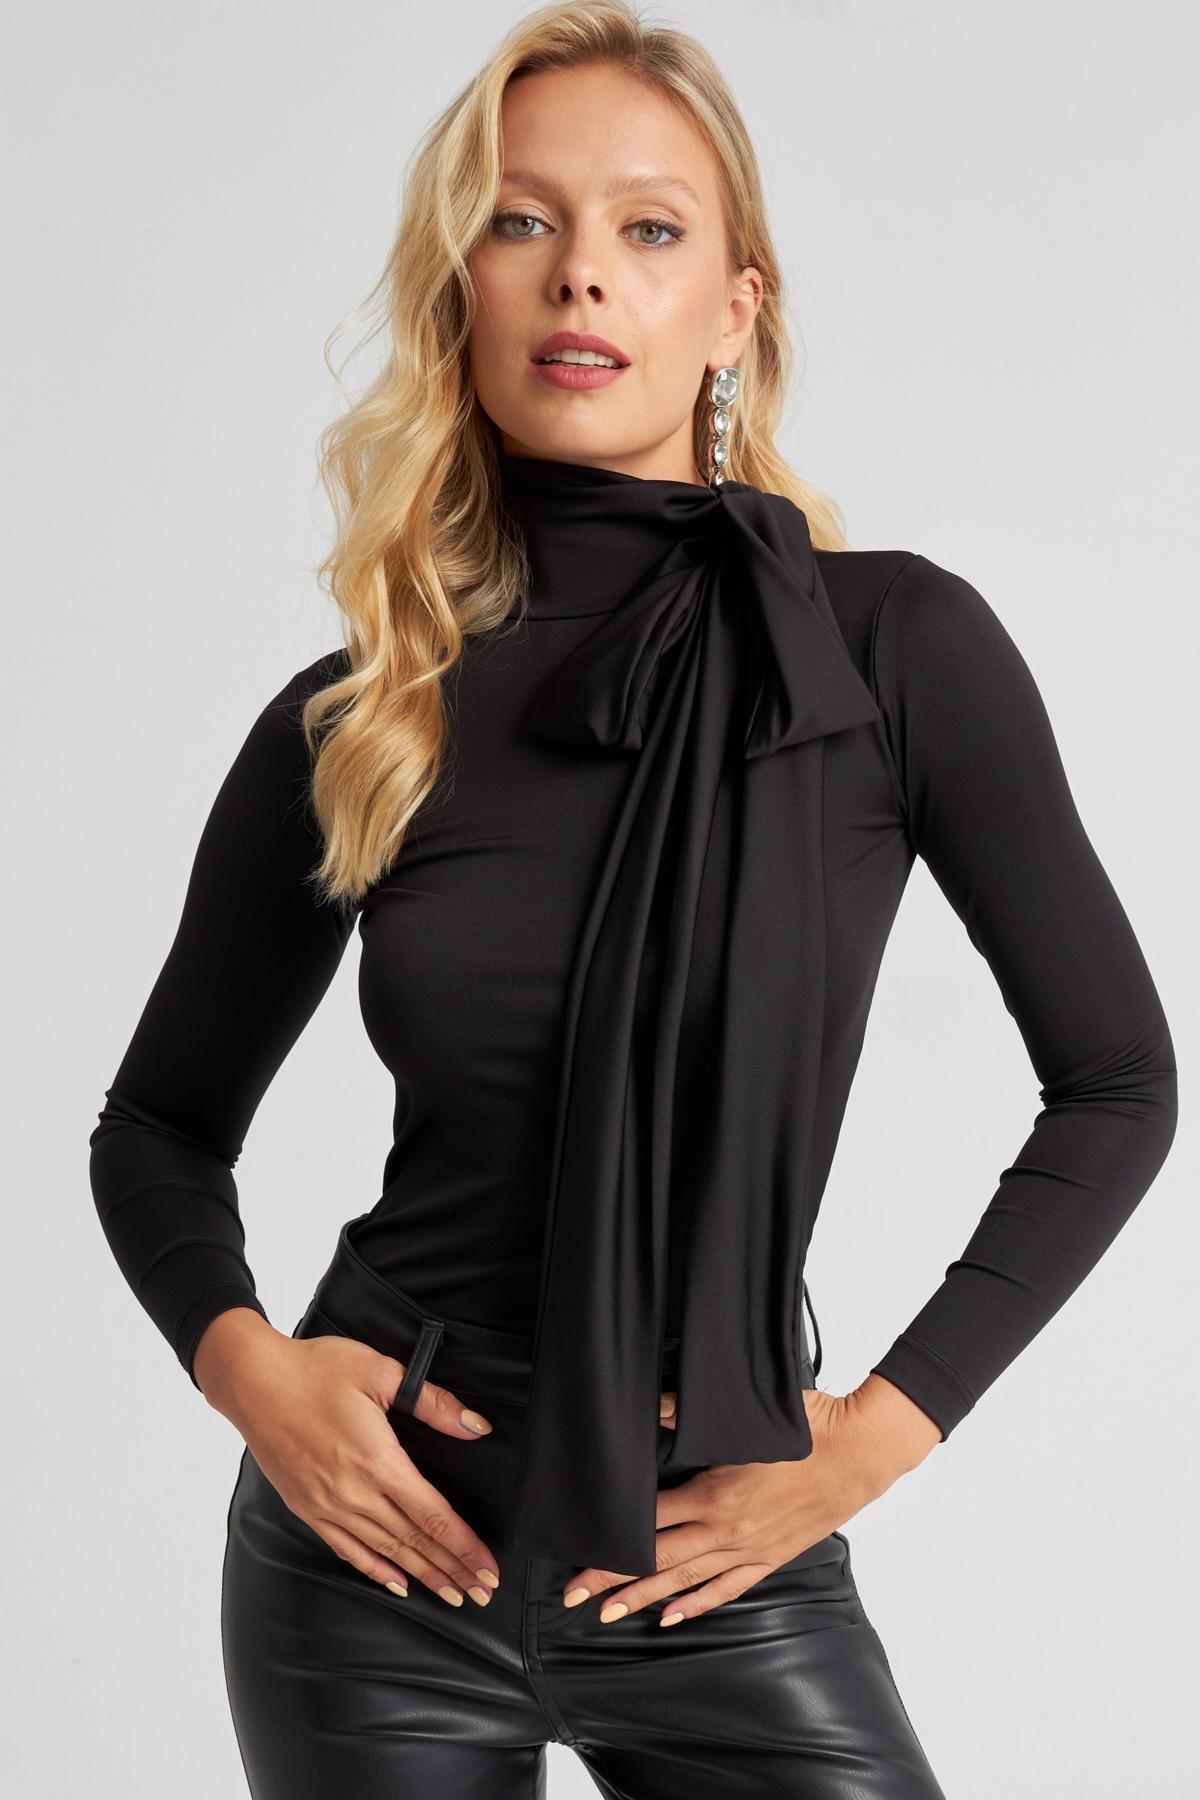 Cool & Sexy - Black Bow Blouse